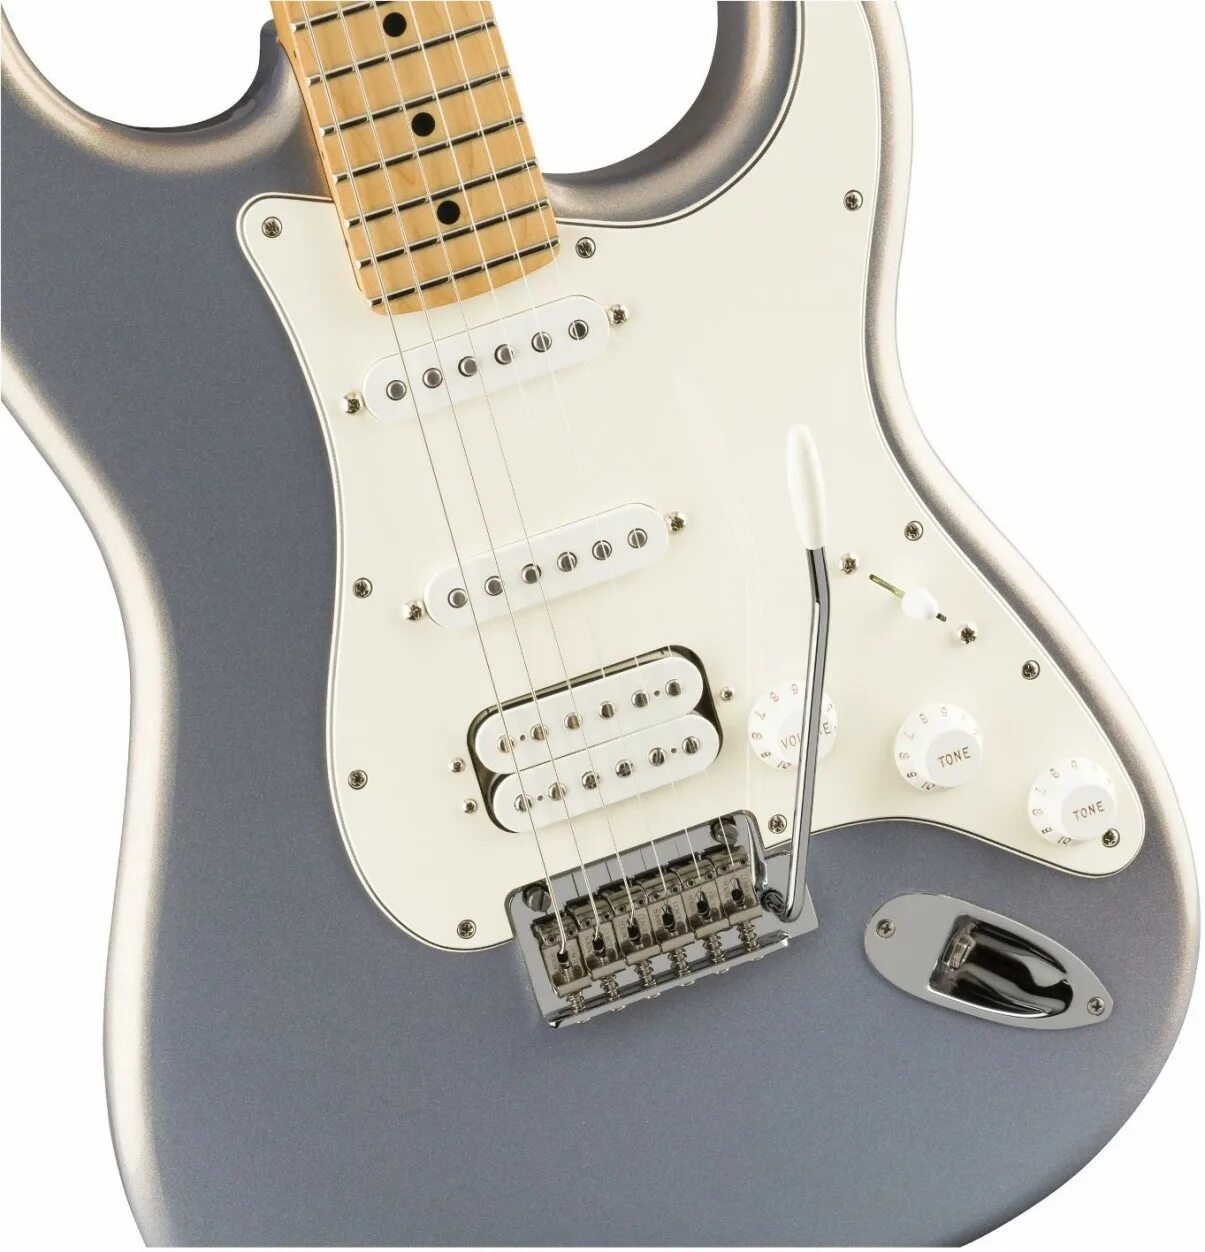 Электрогитара Fender Player Stratocaster. Электрогитара Fender Player Stratocaster HSS Maple Fingerboard Silver. Squier Limited Classic Vibe 60s Stratocaster. Fender Player Stratocaster HSS, Maple Fingerboard электрогитара.